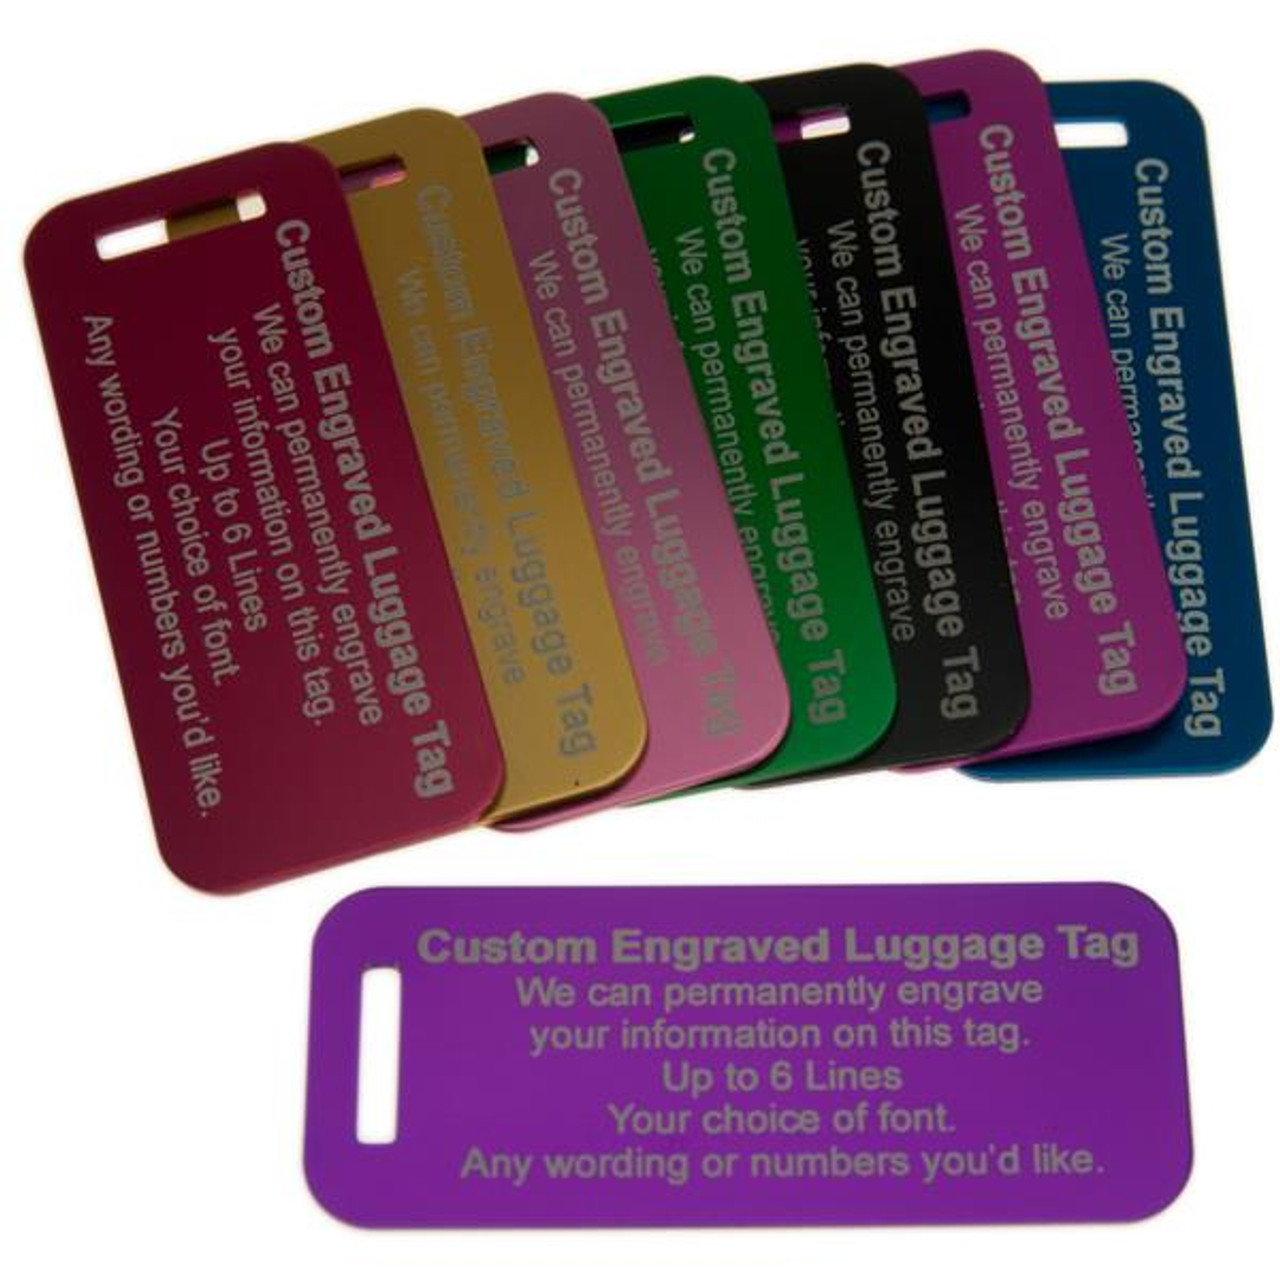 Metal Luggage Tag - Aluminum - Personalized - 3 X 1.25 inches